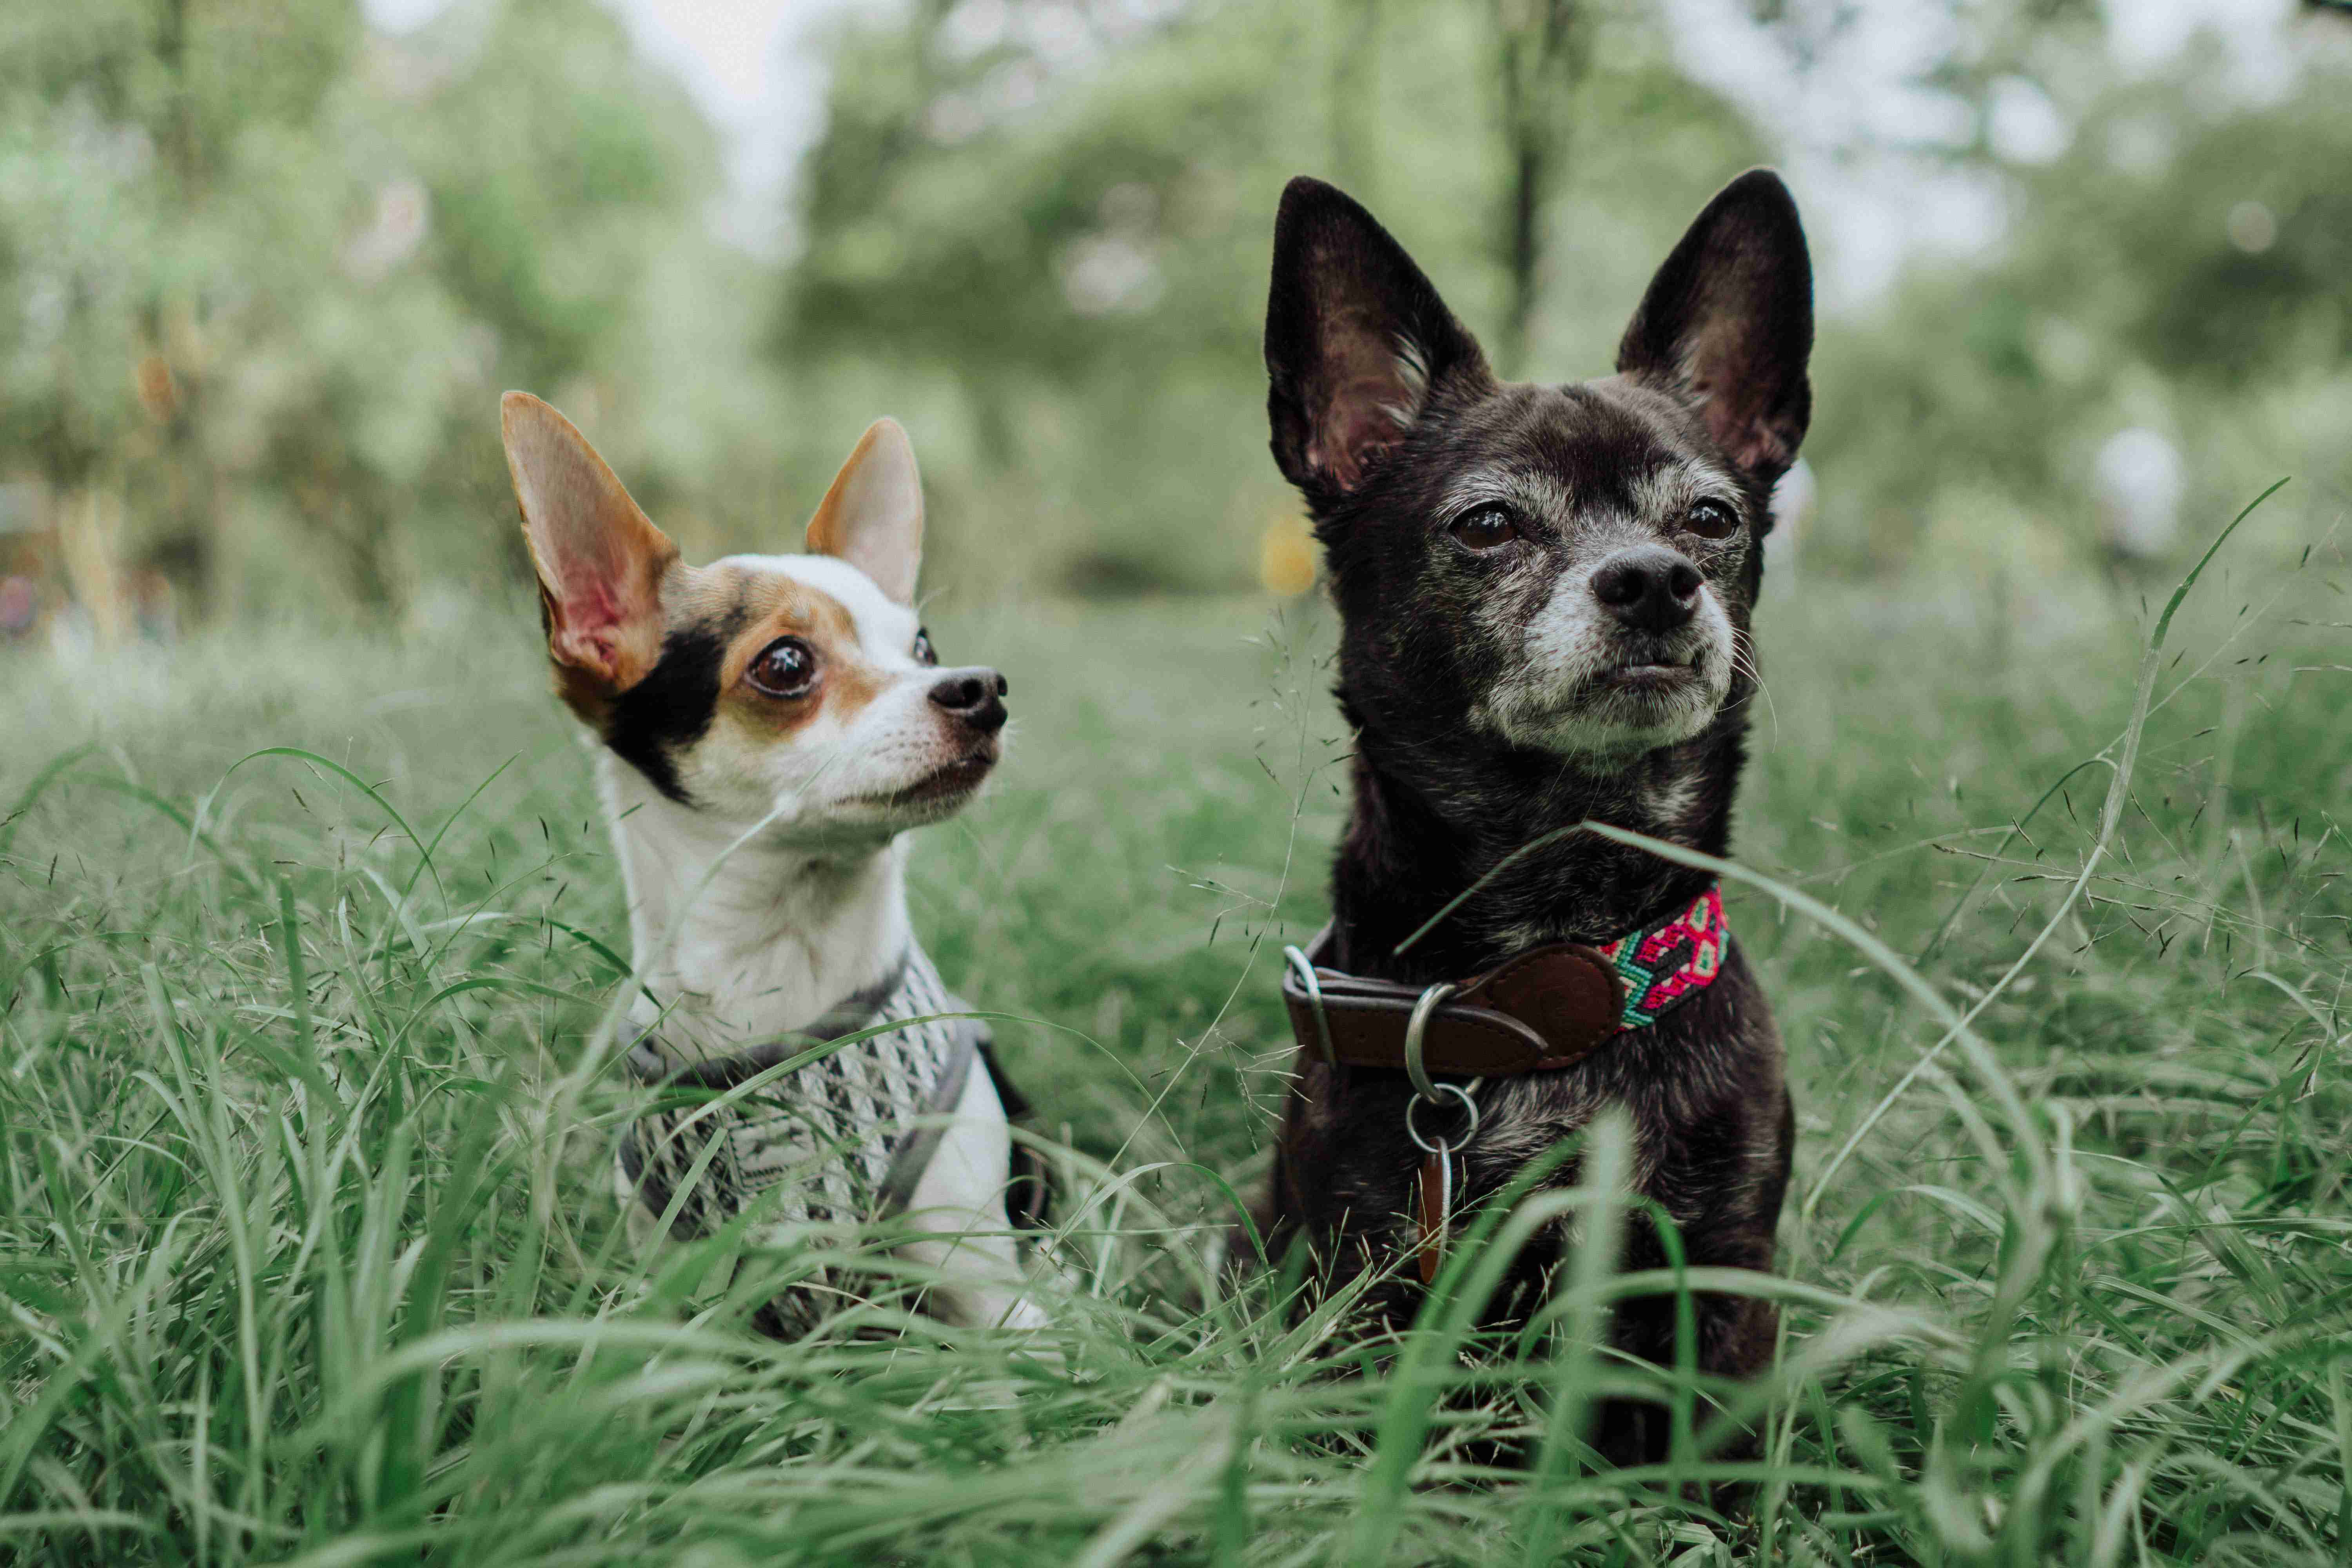 Are there any warning signs that a Chihuahua's anger issues are improving or worsening?